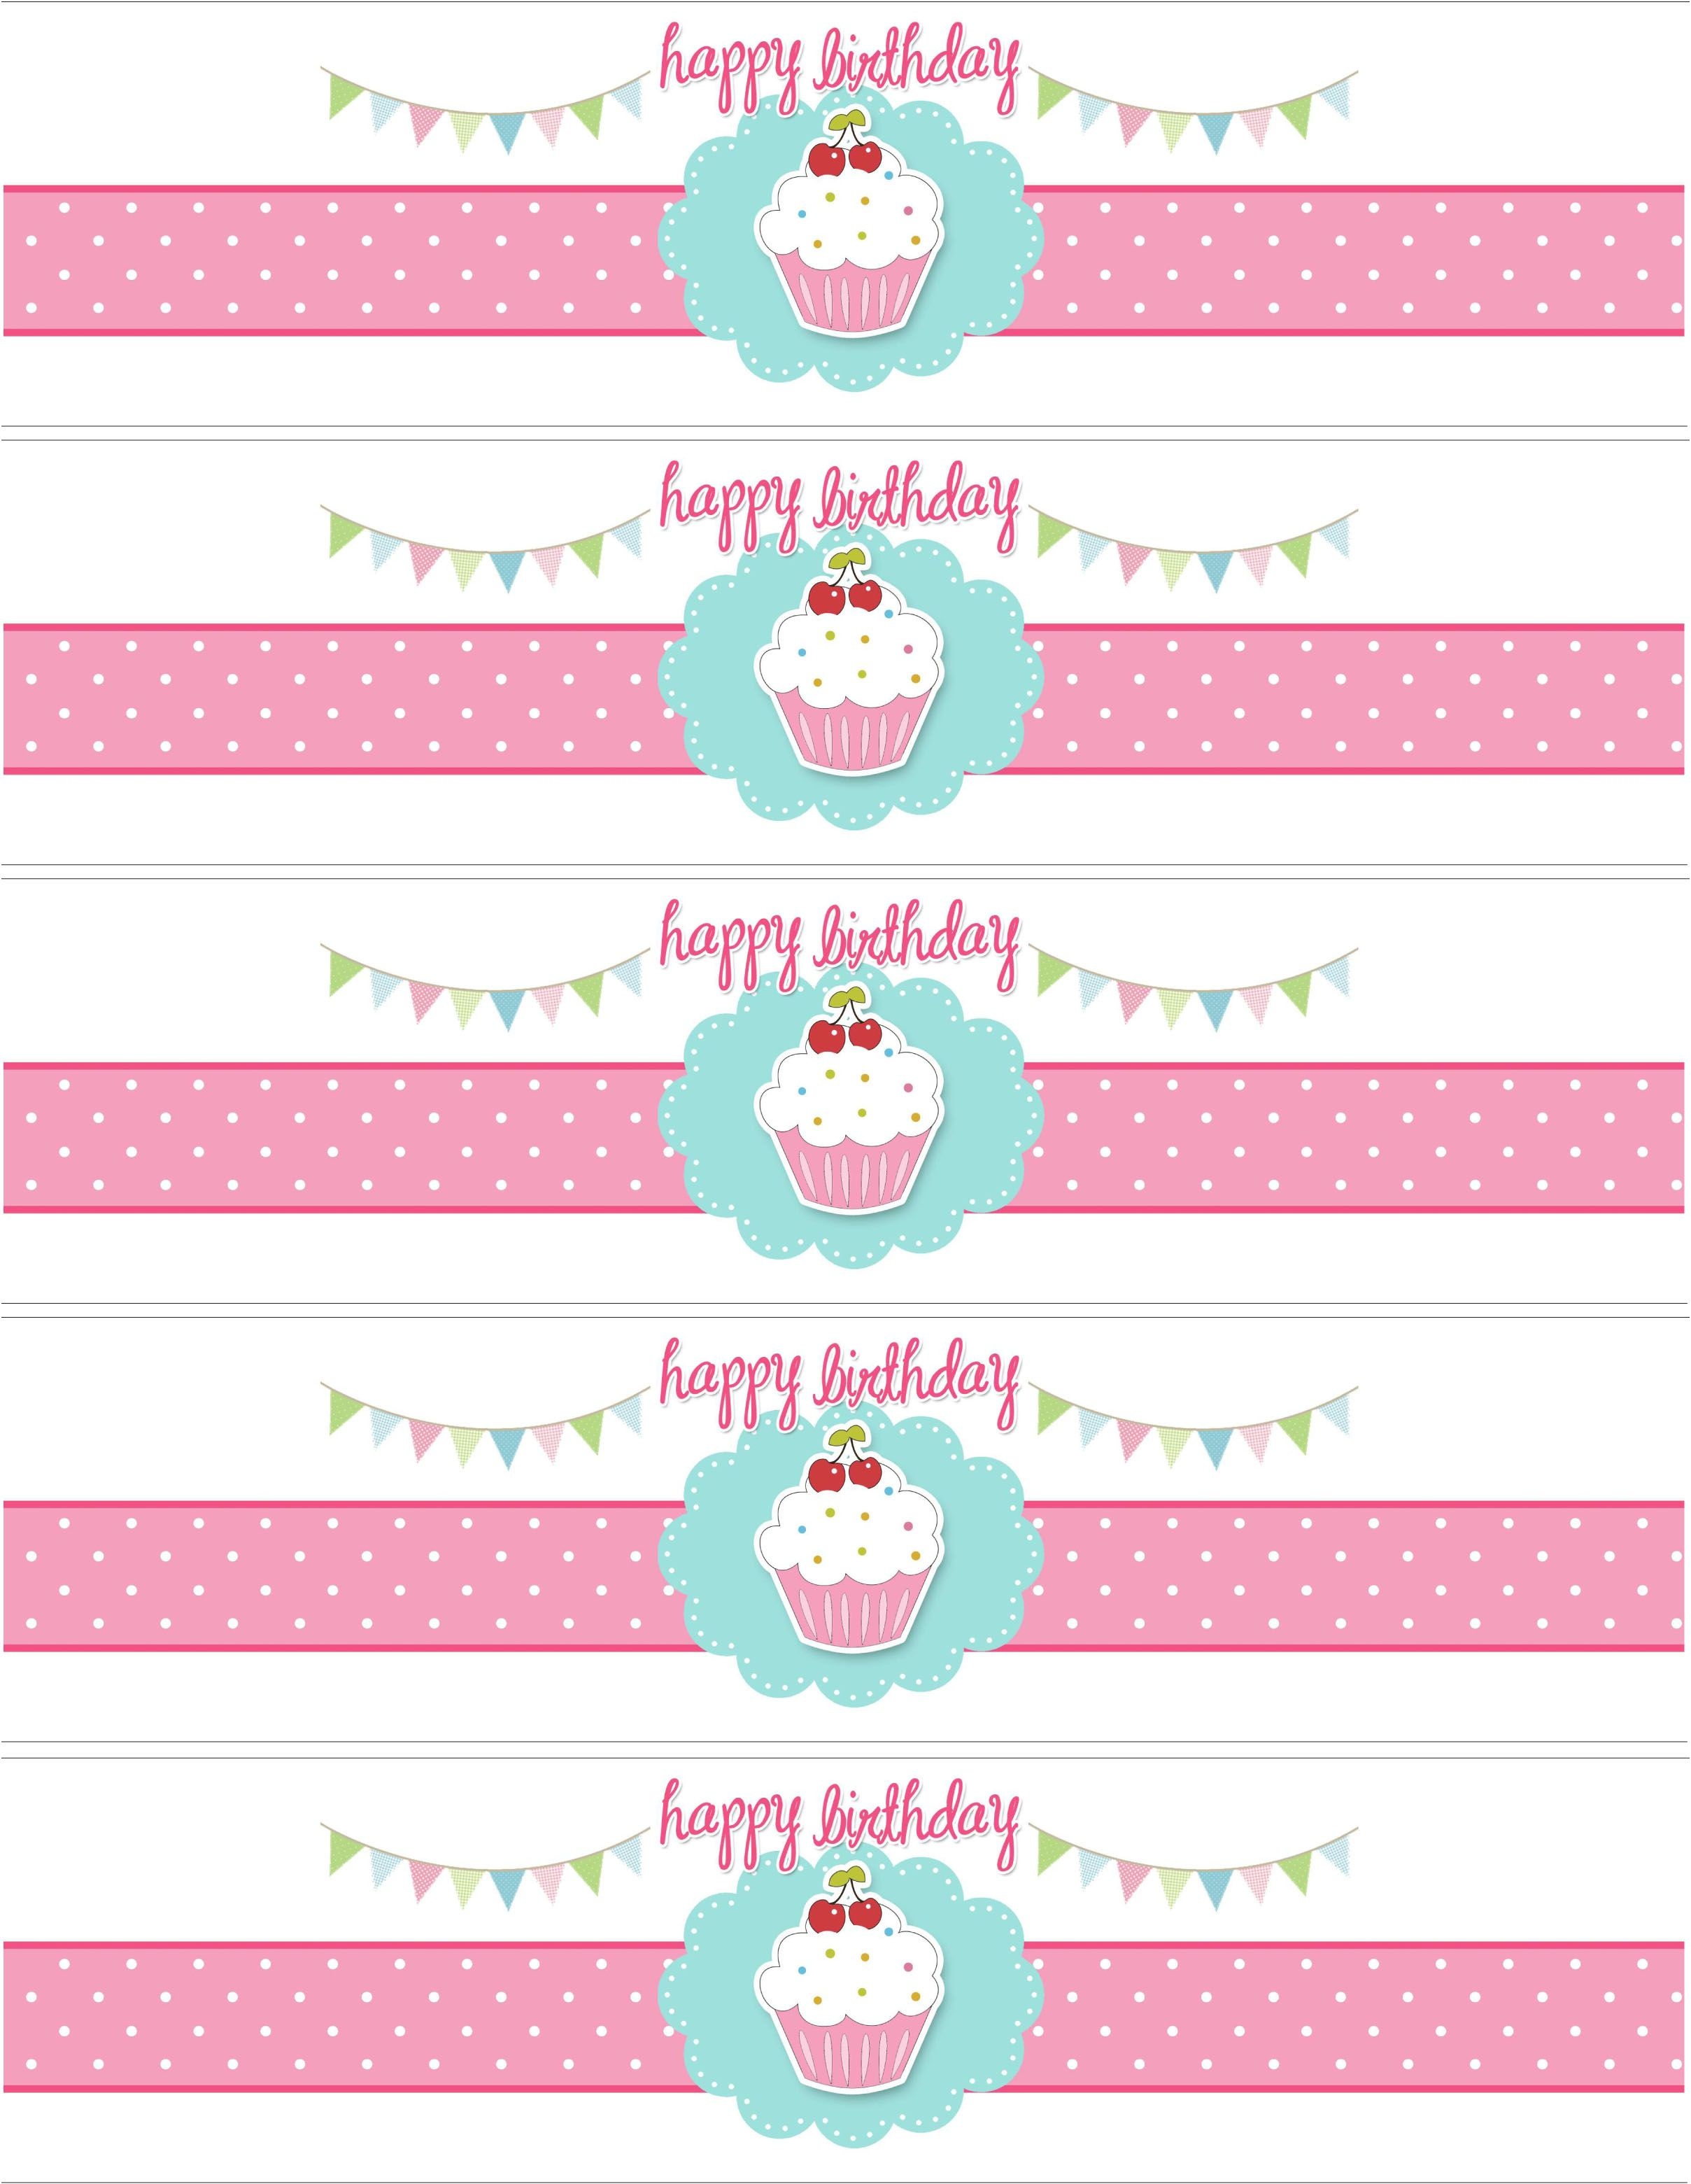 Cupcake Birthday Party With Free Printables | Party Ideas - Free Printable Water Bottle Labels For Birthday